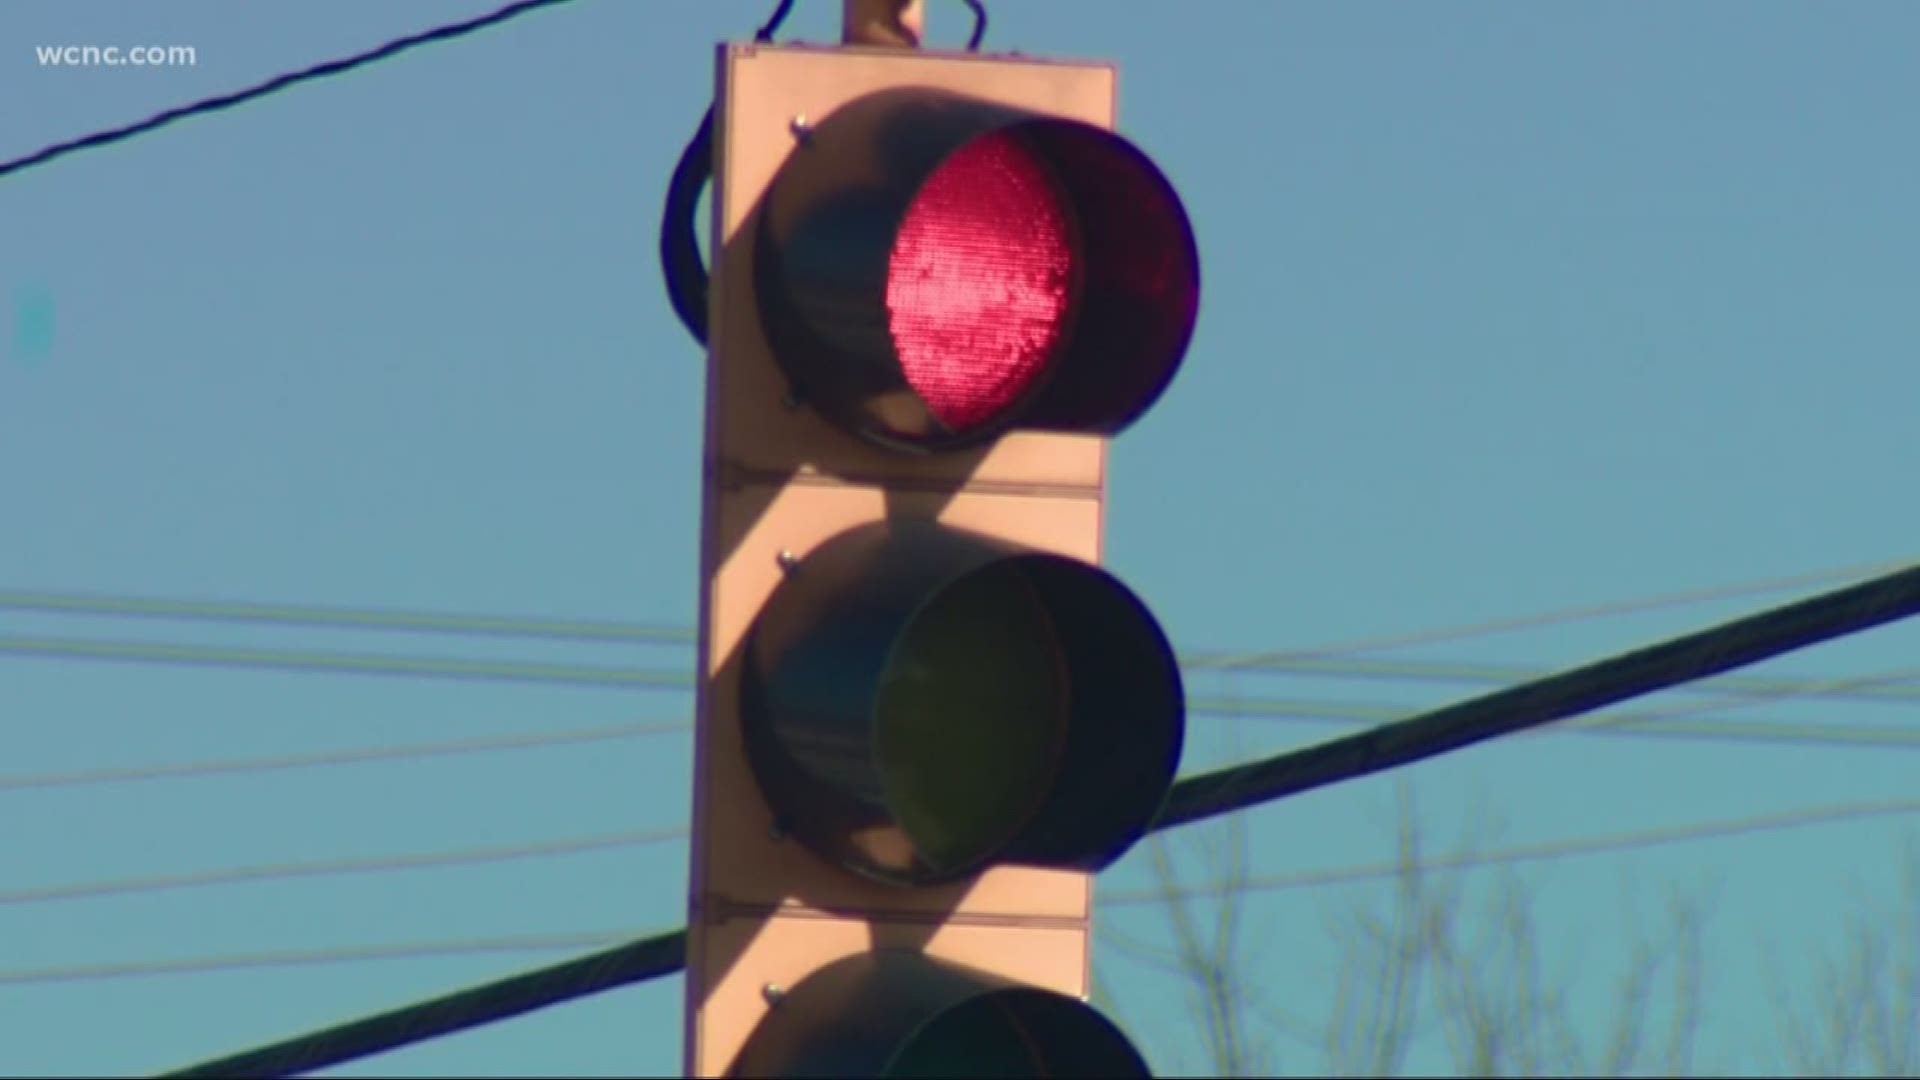 CDOT presented their new traffic safety program called "vision zero." Red light cameras weren't included, instead they recommended speed cameras.